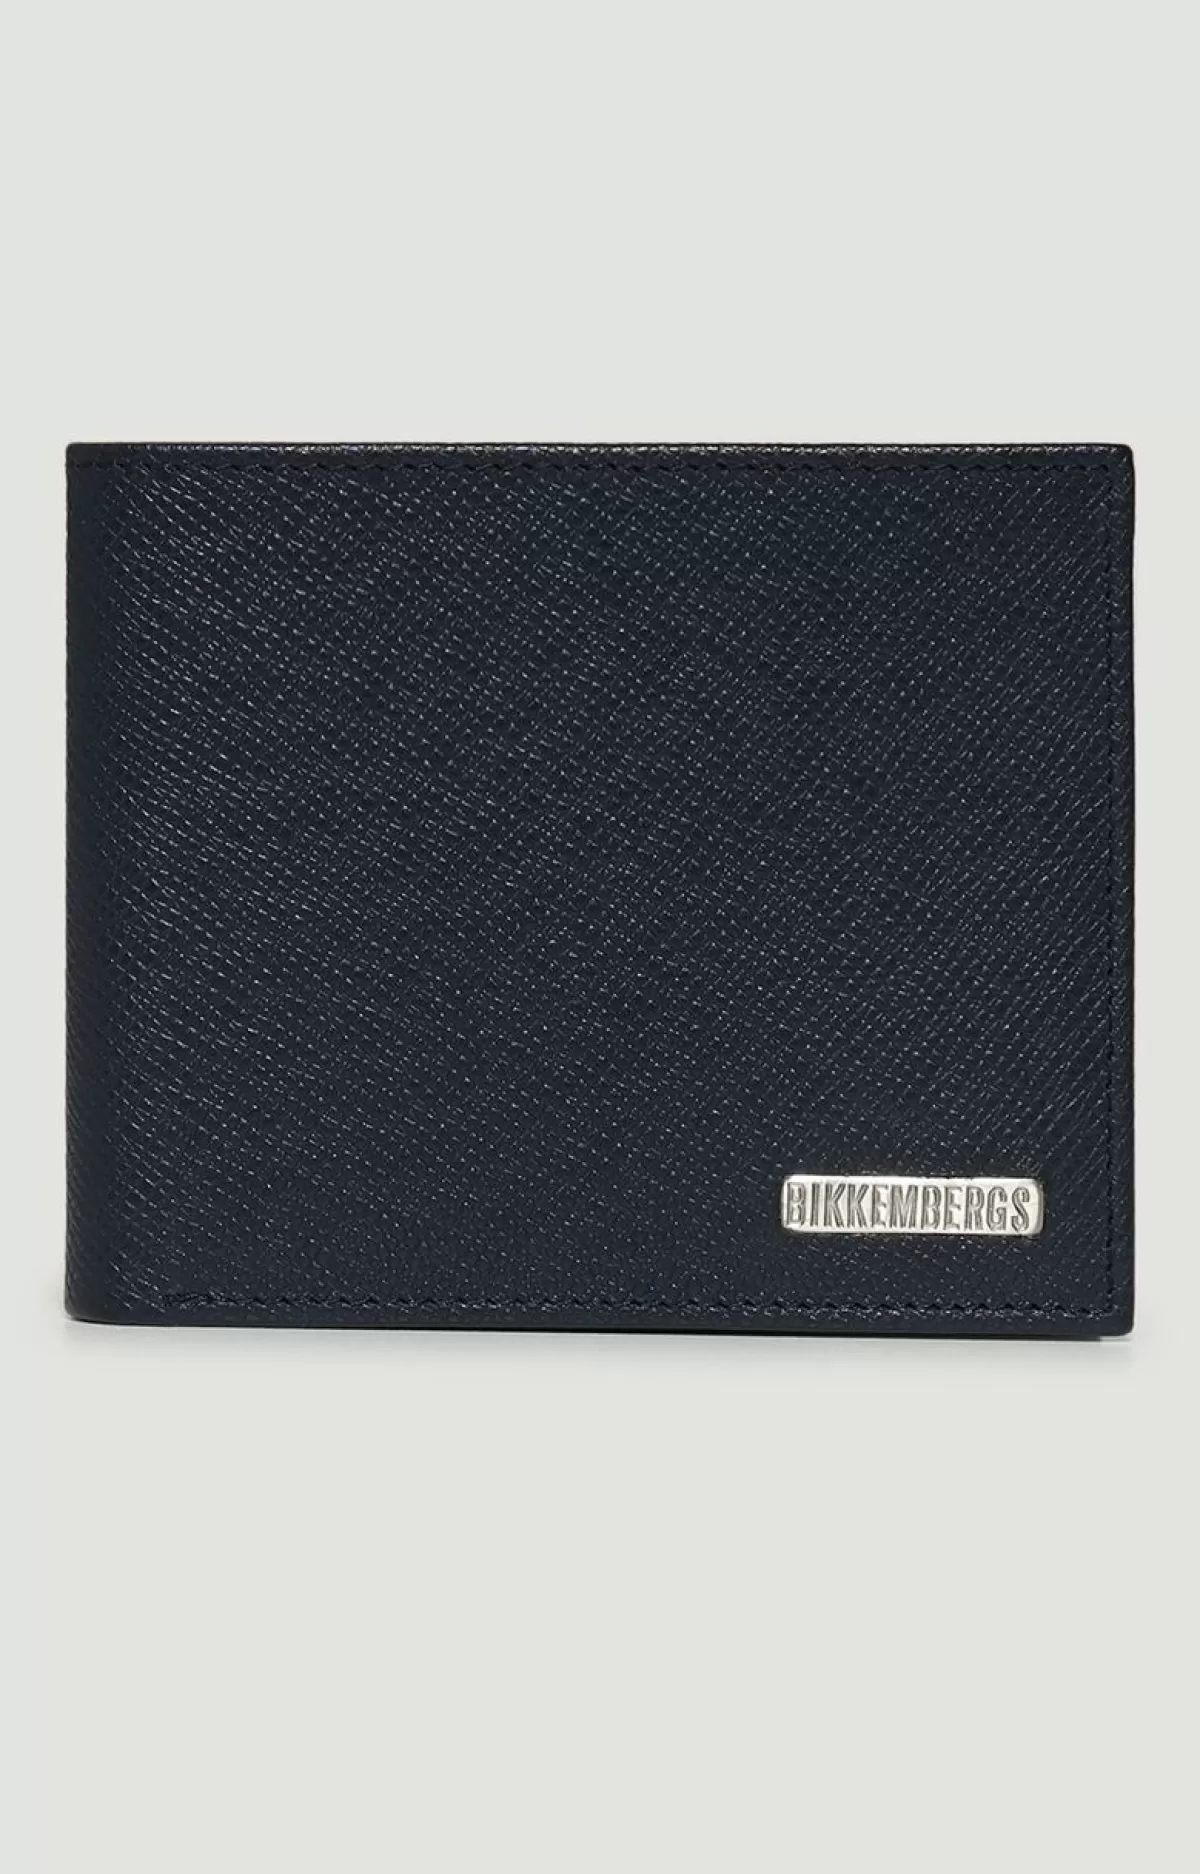 Bikkembergs 5-Card Mini Rfid Men'S Wallet In Textured Leather Navy Store